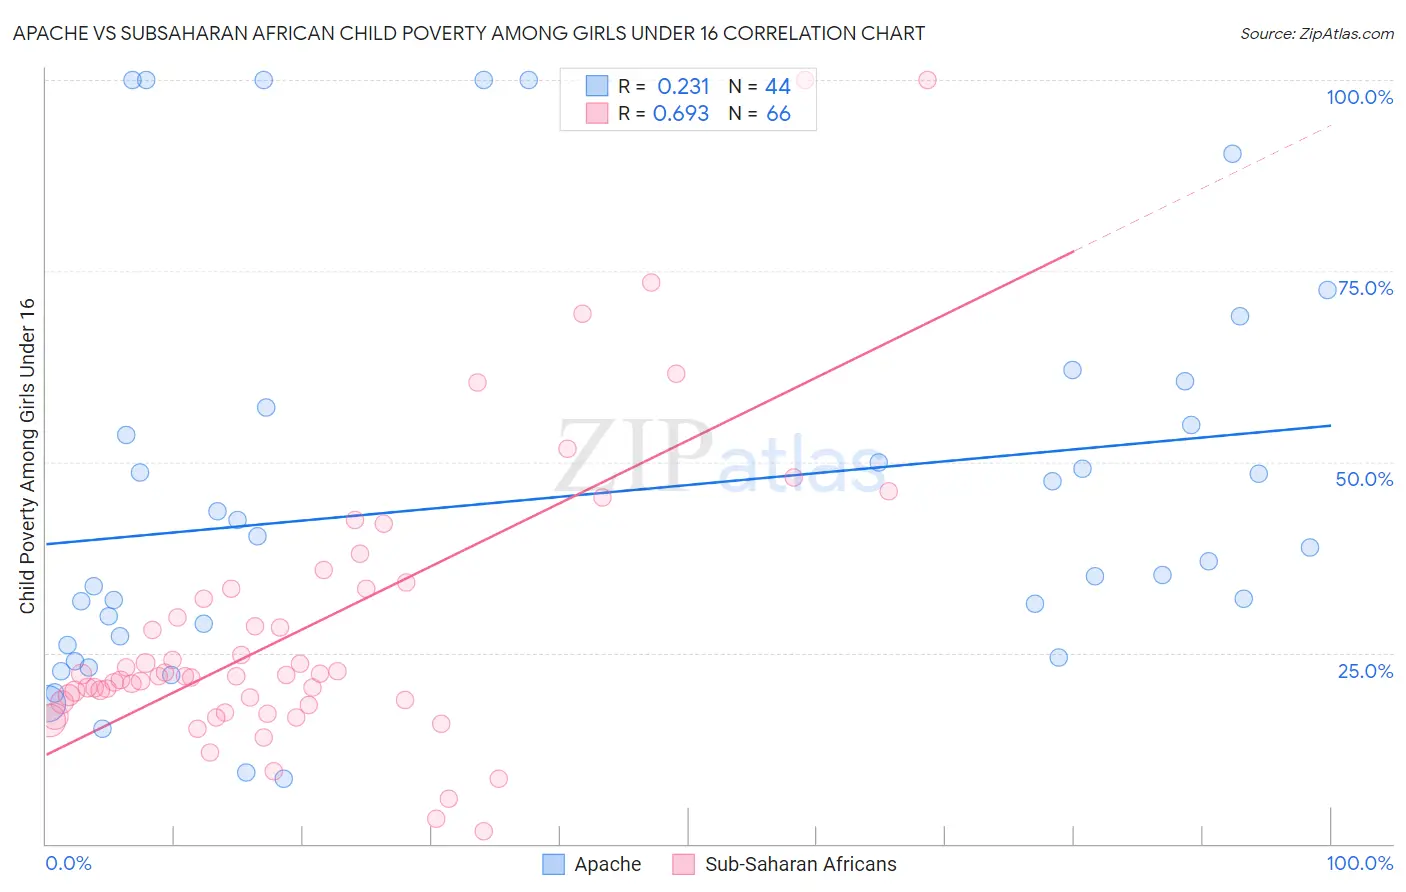 Apache vs Subsaharan African Child Poverty Among Girls Under 16